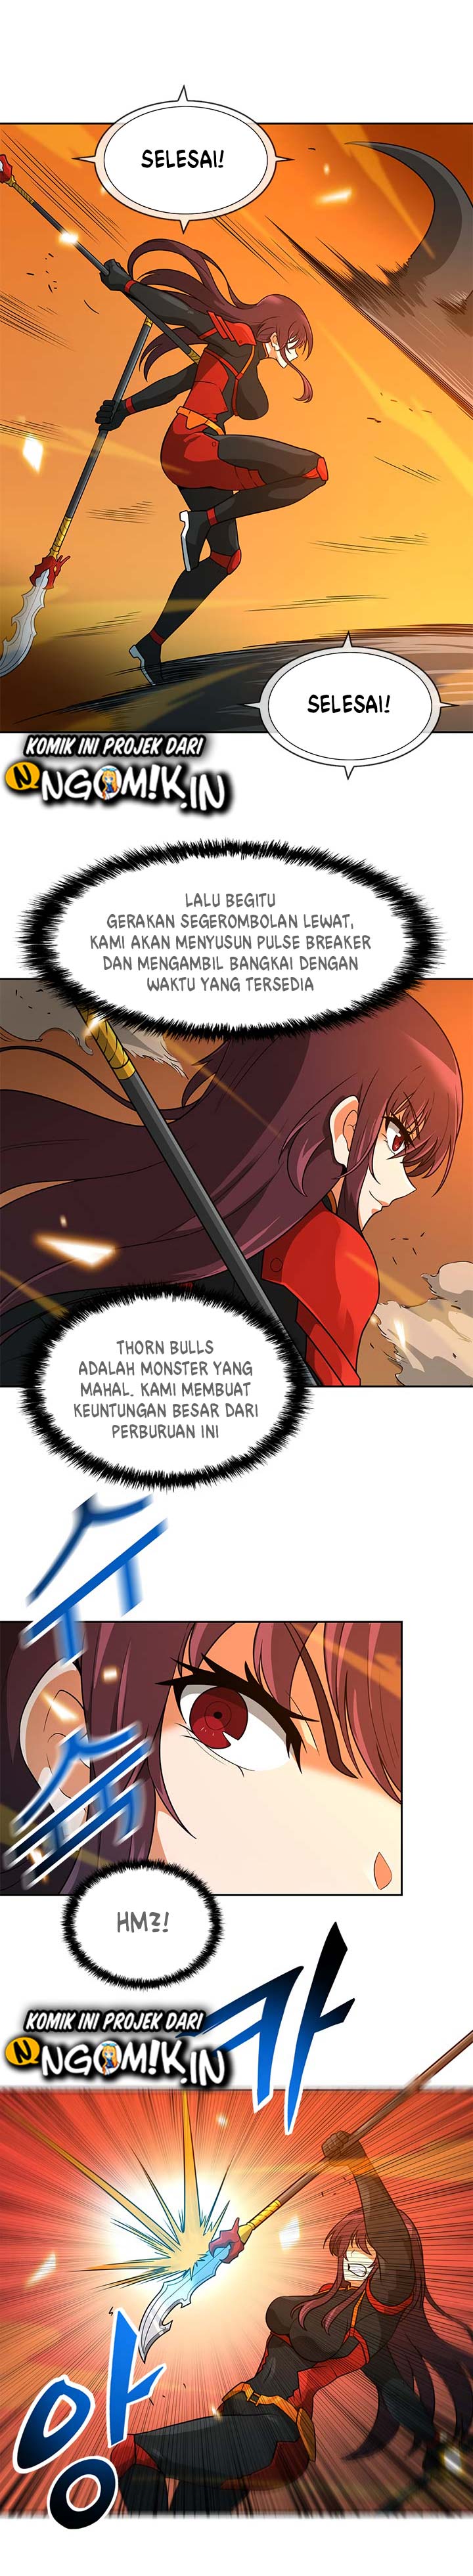 Auto Hunting Chapter 45